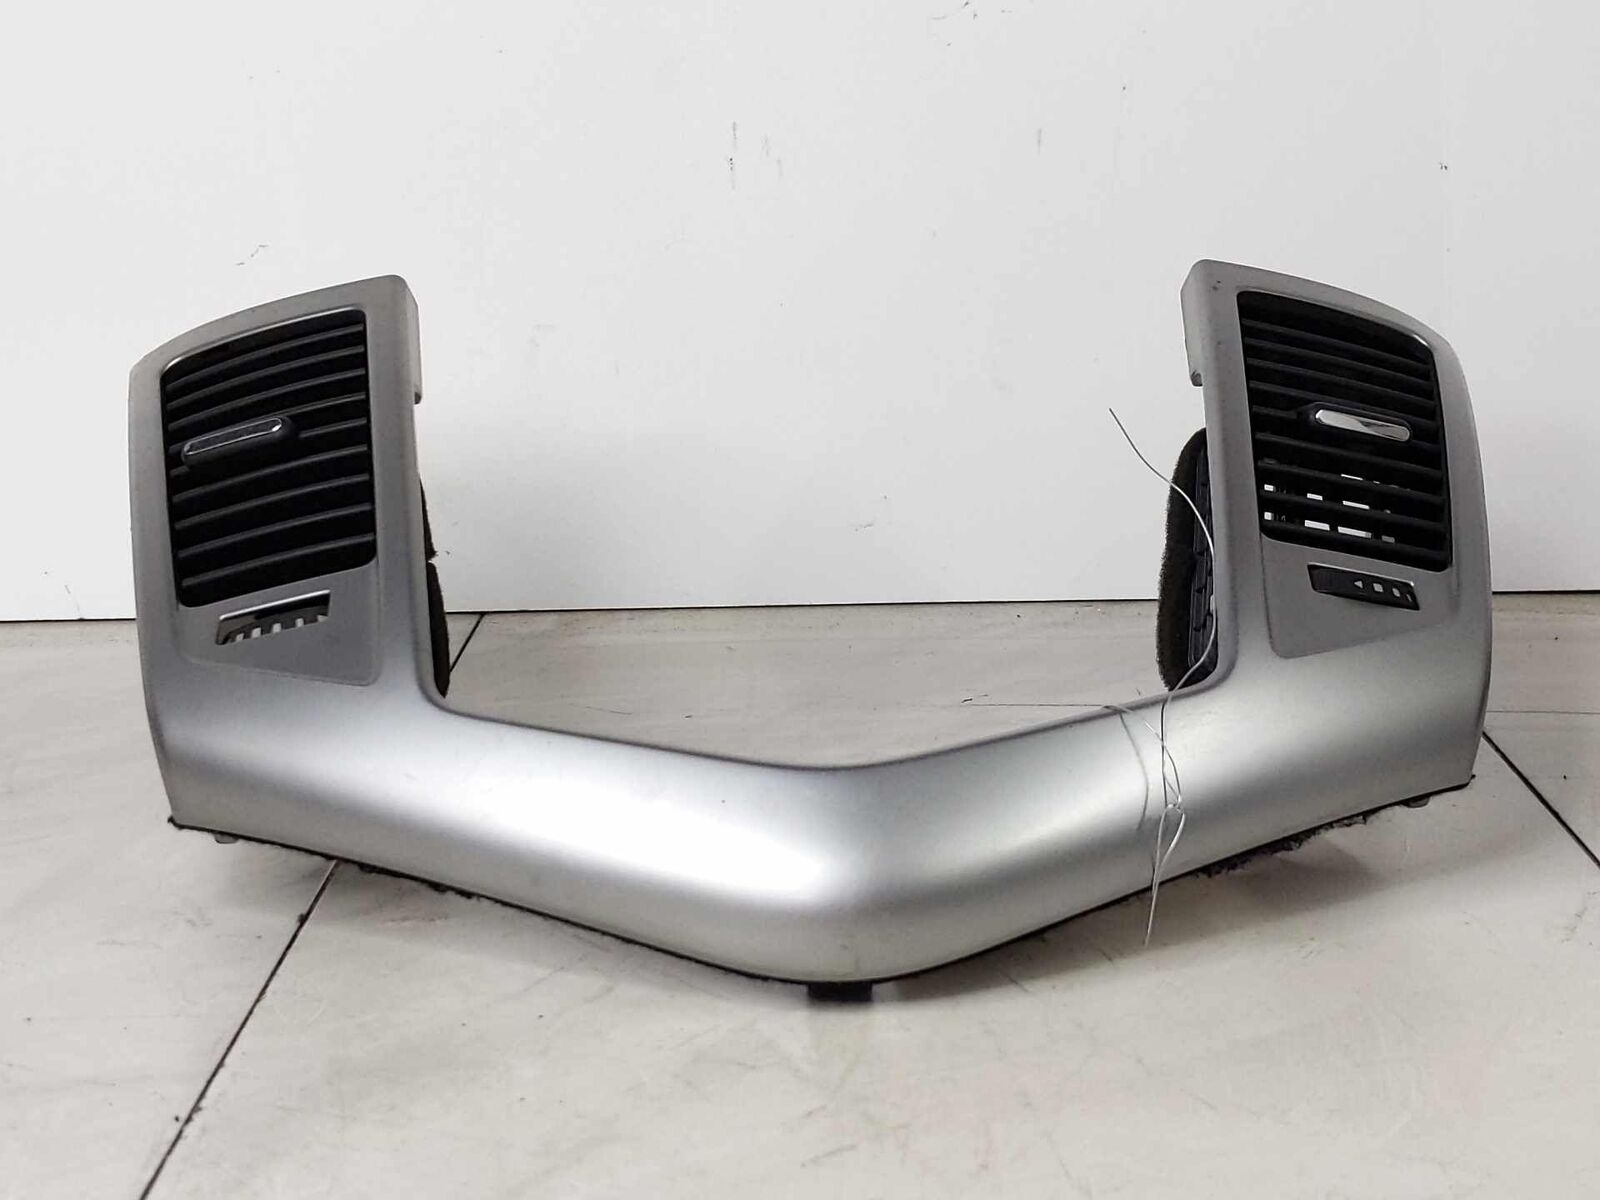 A/C AC Heater HVAC Center Air Vents with Bezel OEM CHEVY CRUZE 2015